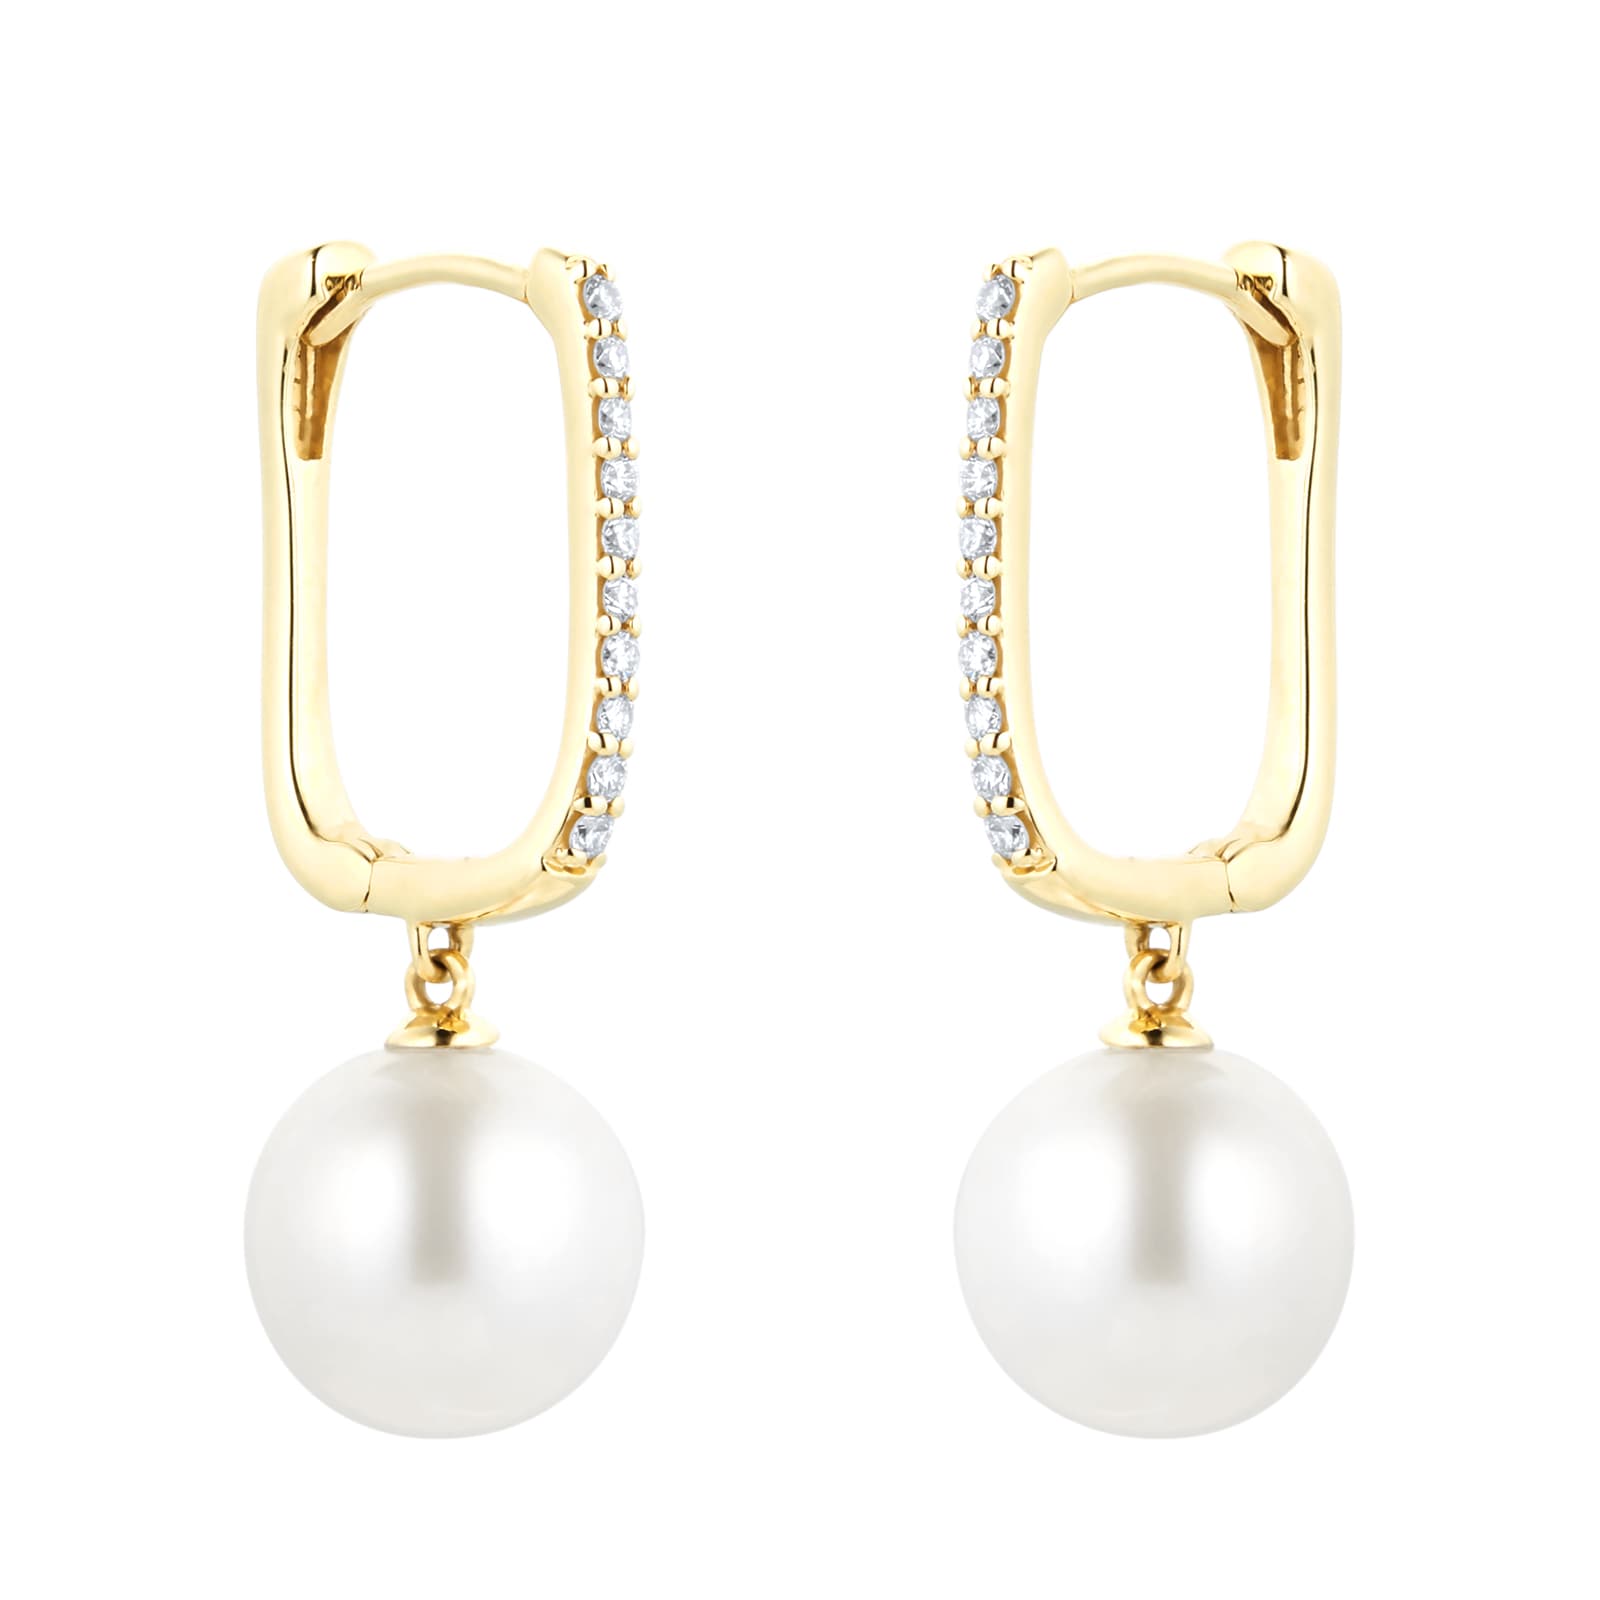 Pearl Jewellery, White & Gold Pearl Diamond Earrings, Necklaces ...